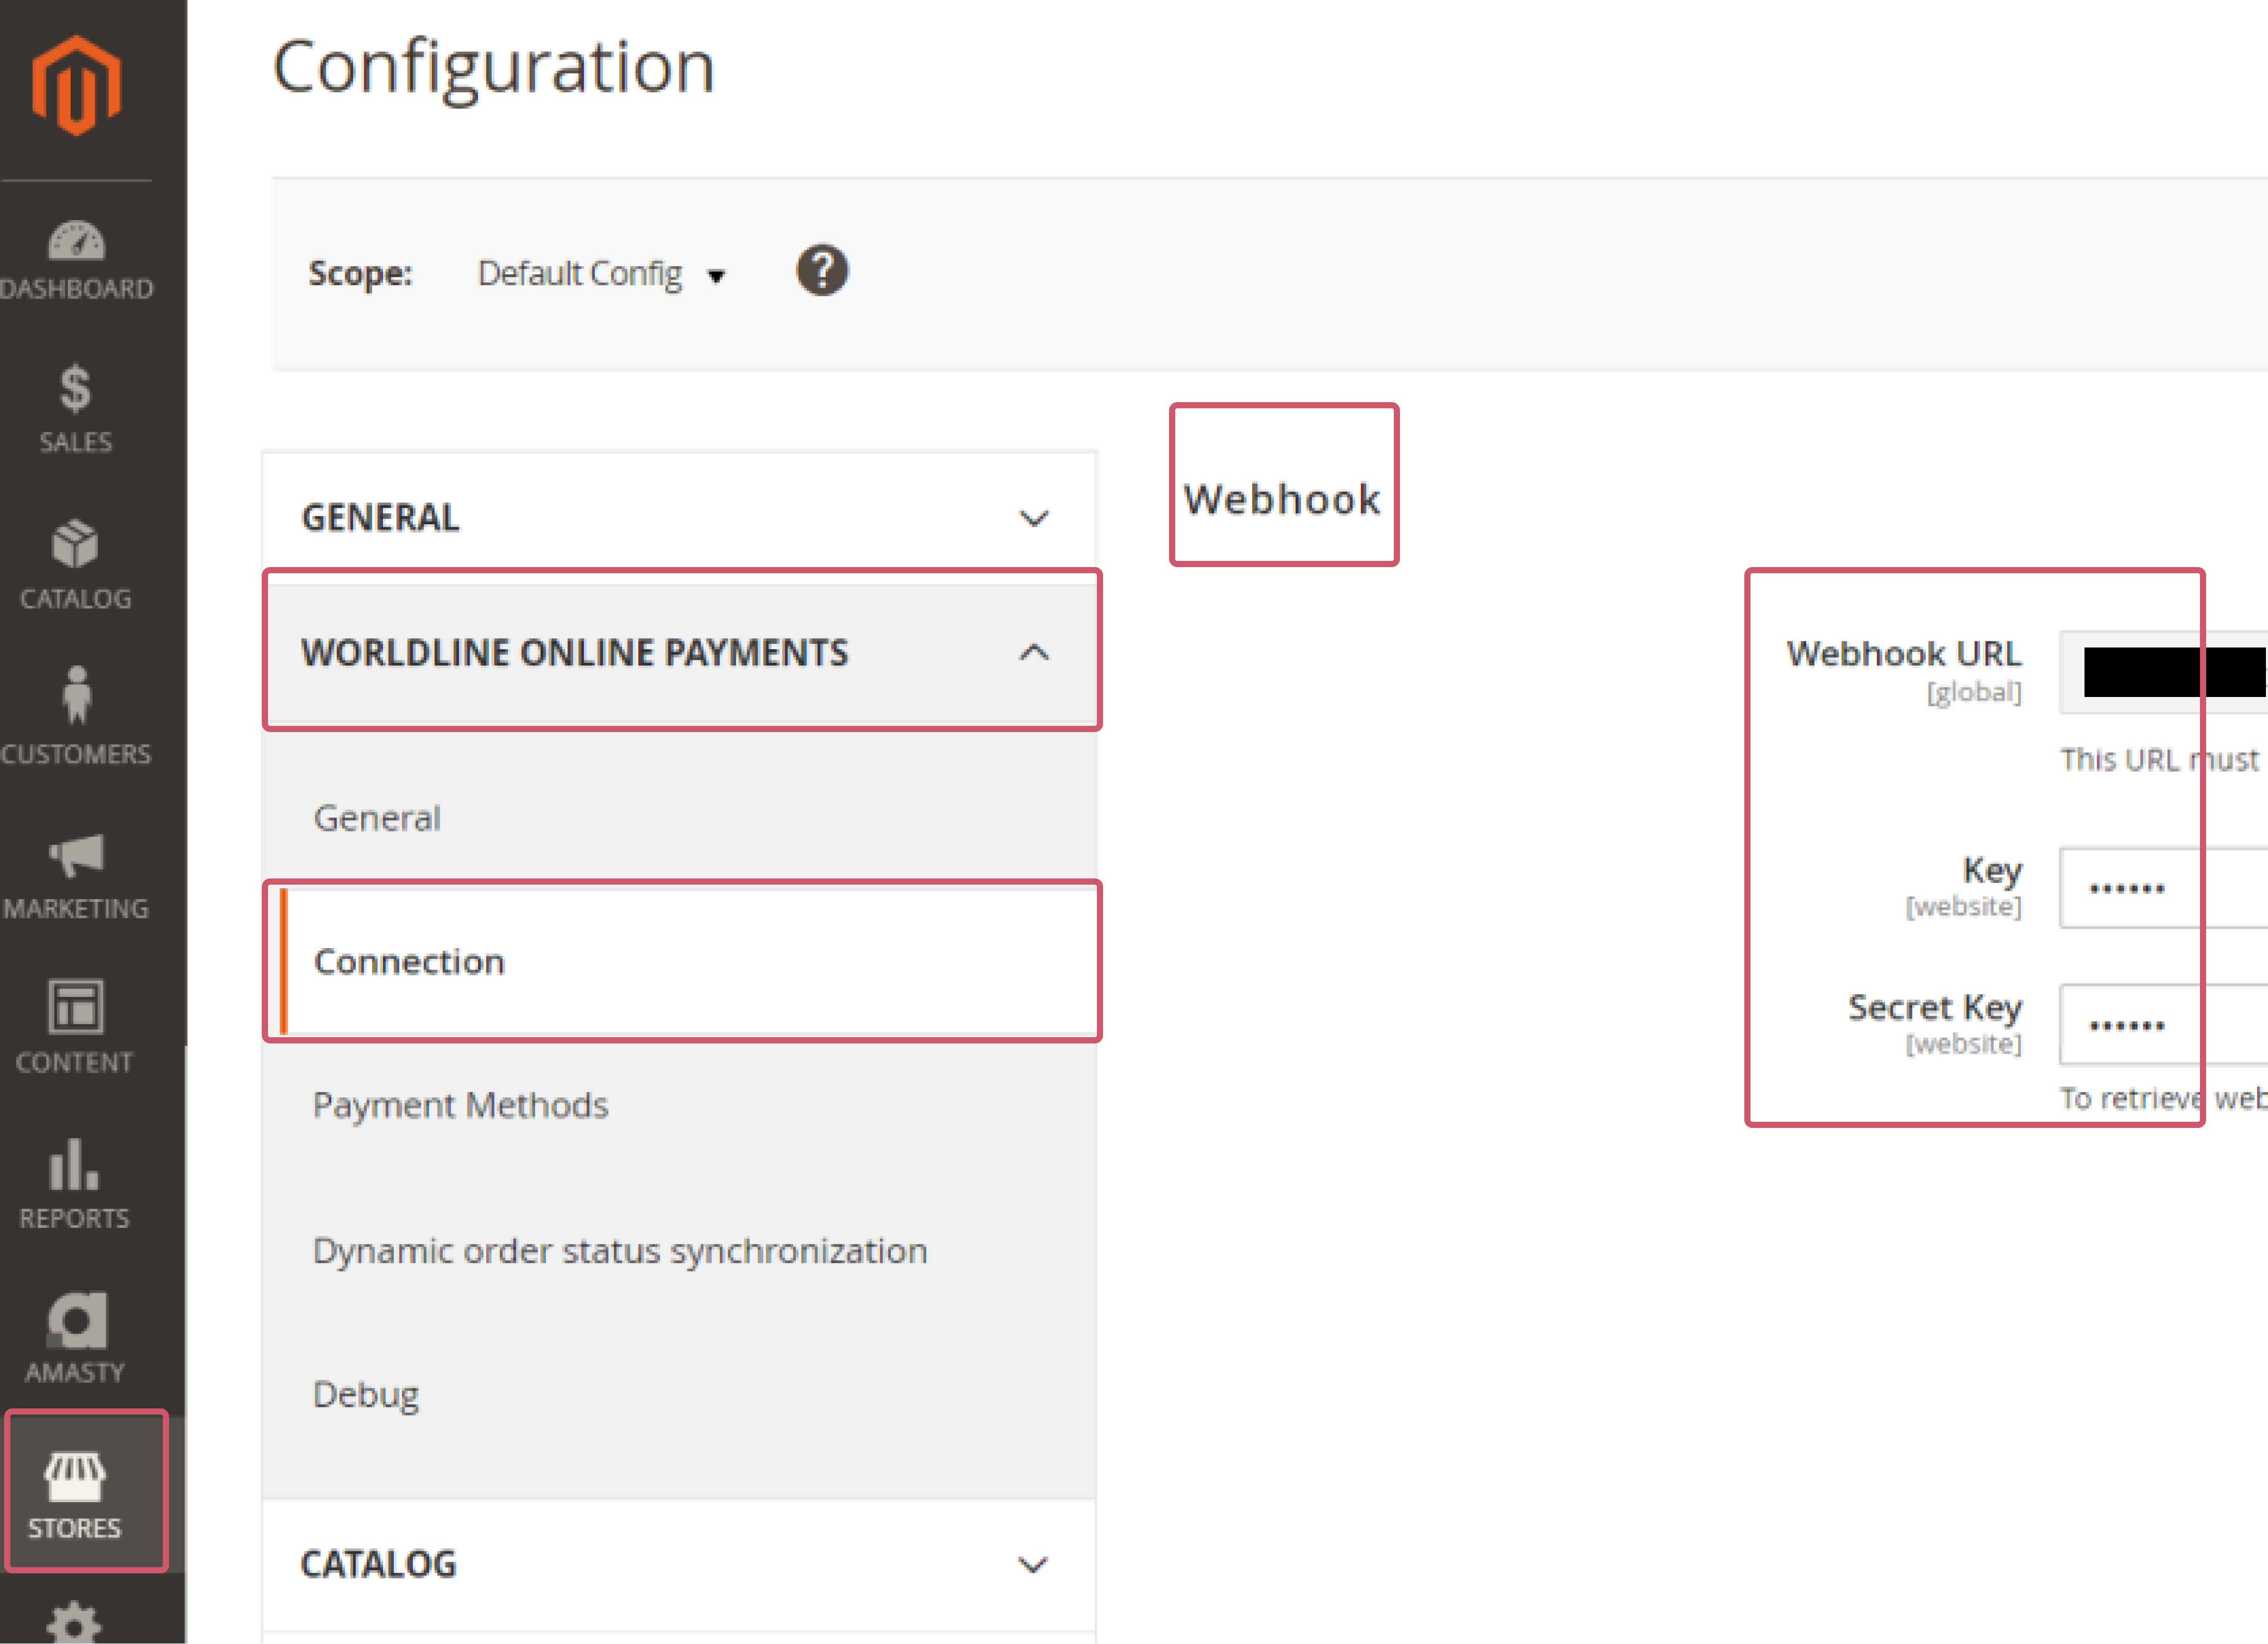 The image shows where to find the “Webhooks” module in the Magento Back Office